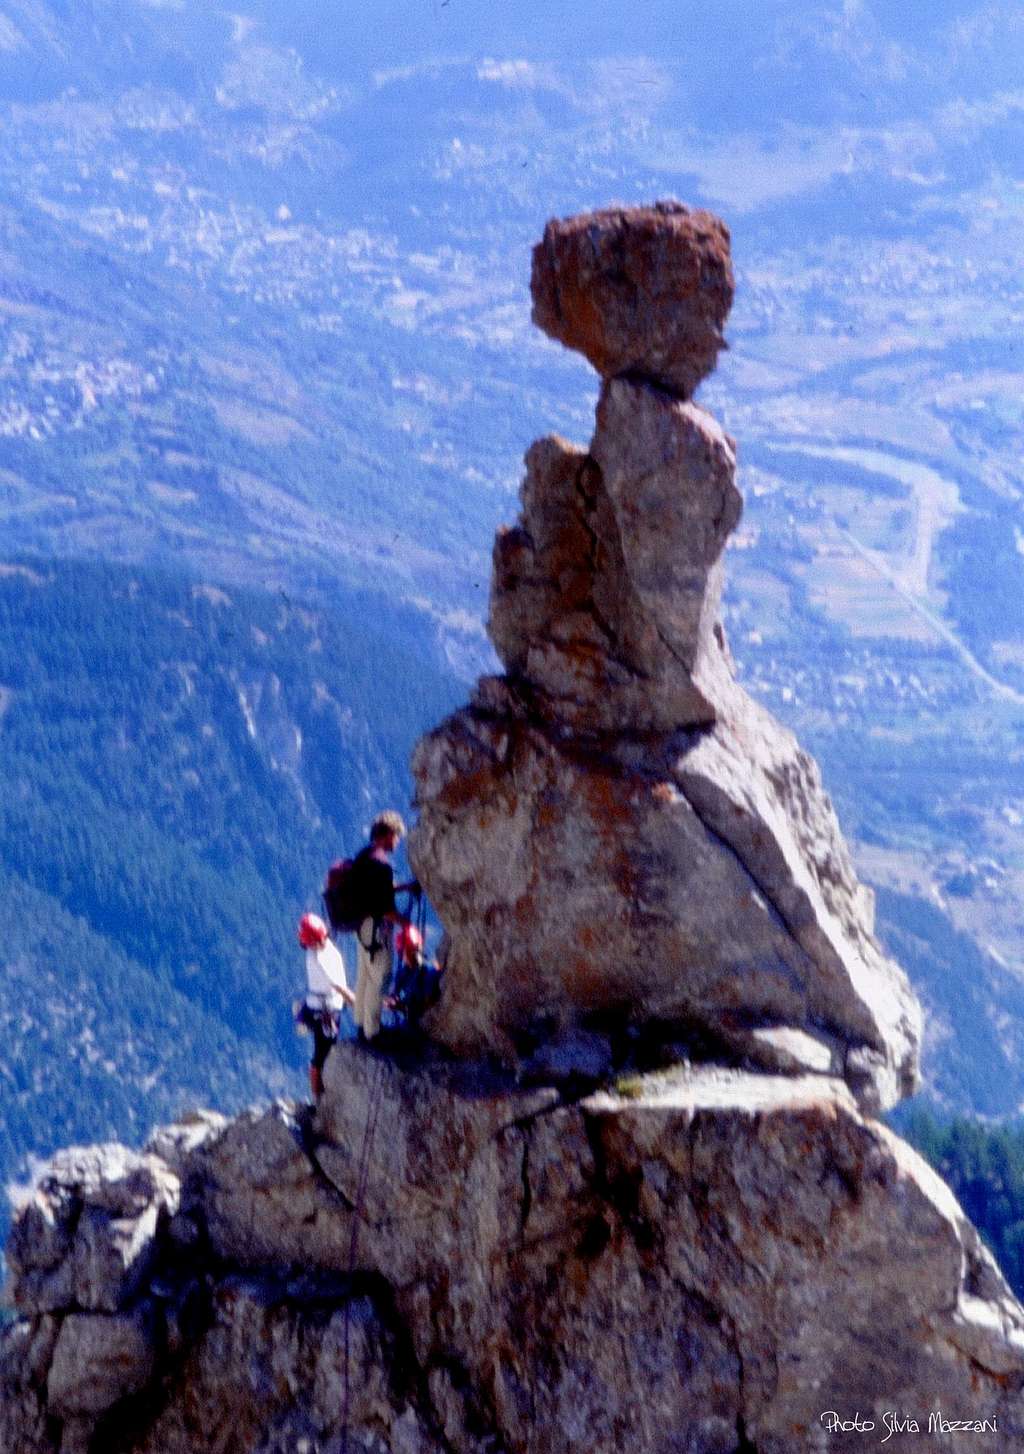 The mushroom at the top of the first tong, Tenailles de Mombrison